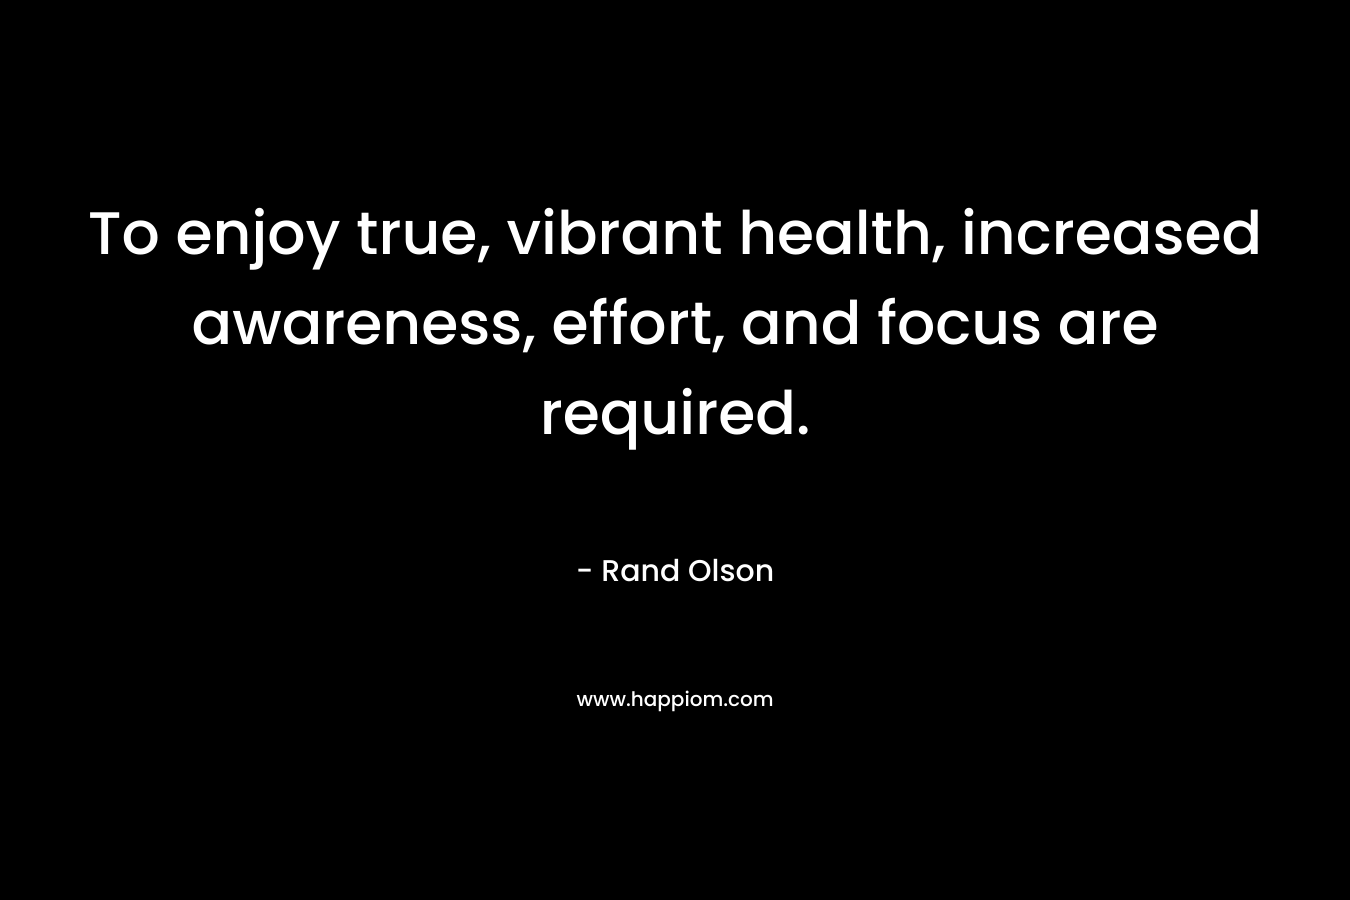 To enjoy true, vibrant health, increased awareness, effort, and focus are required. – Rand Olson